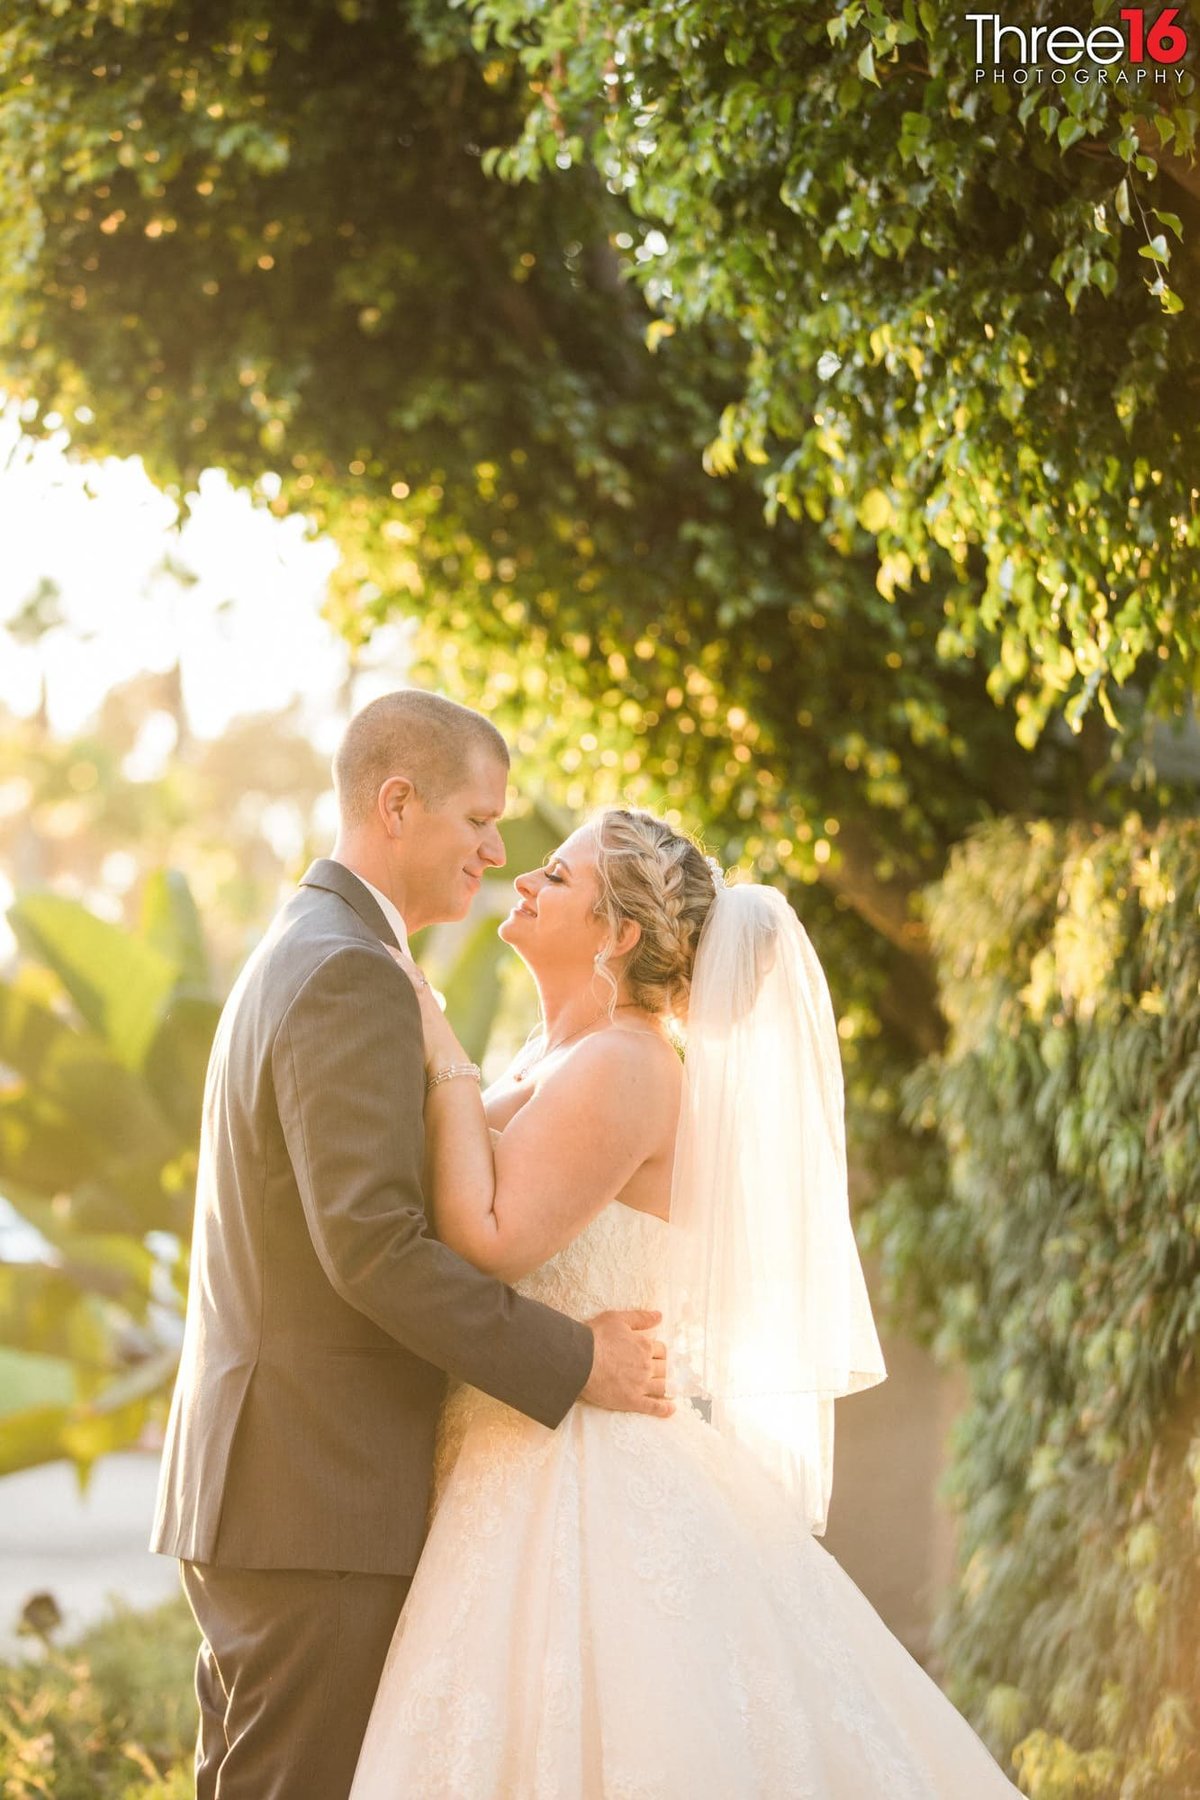 Bride and Groom share intimate moment under a tree